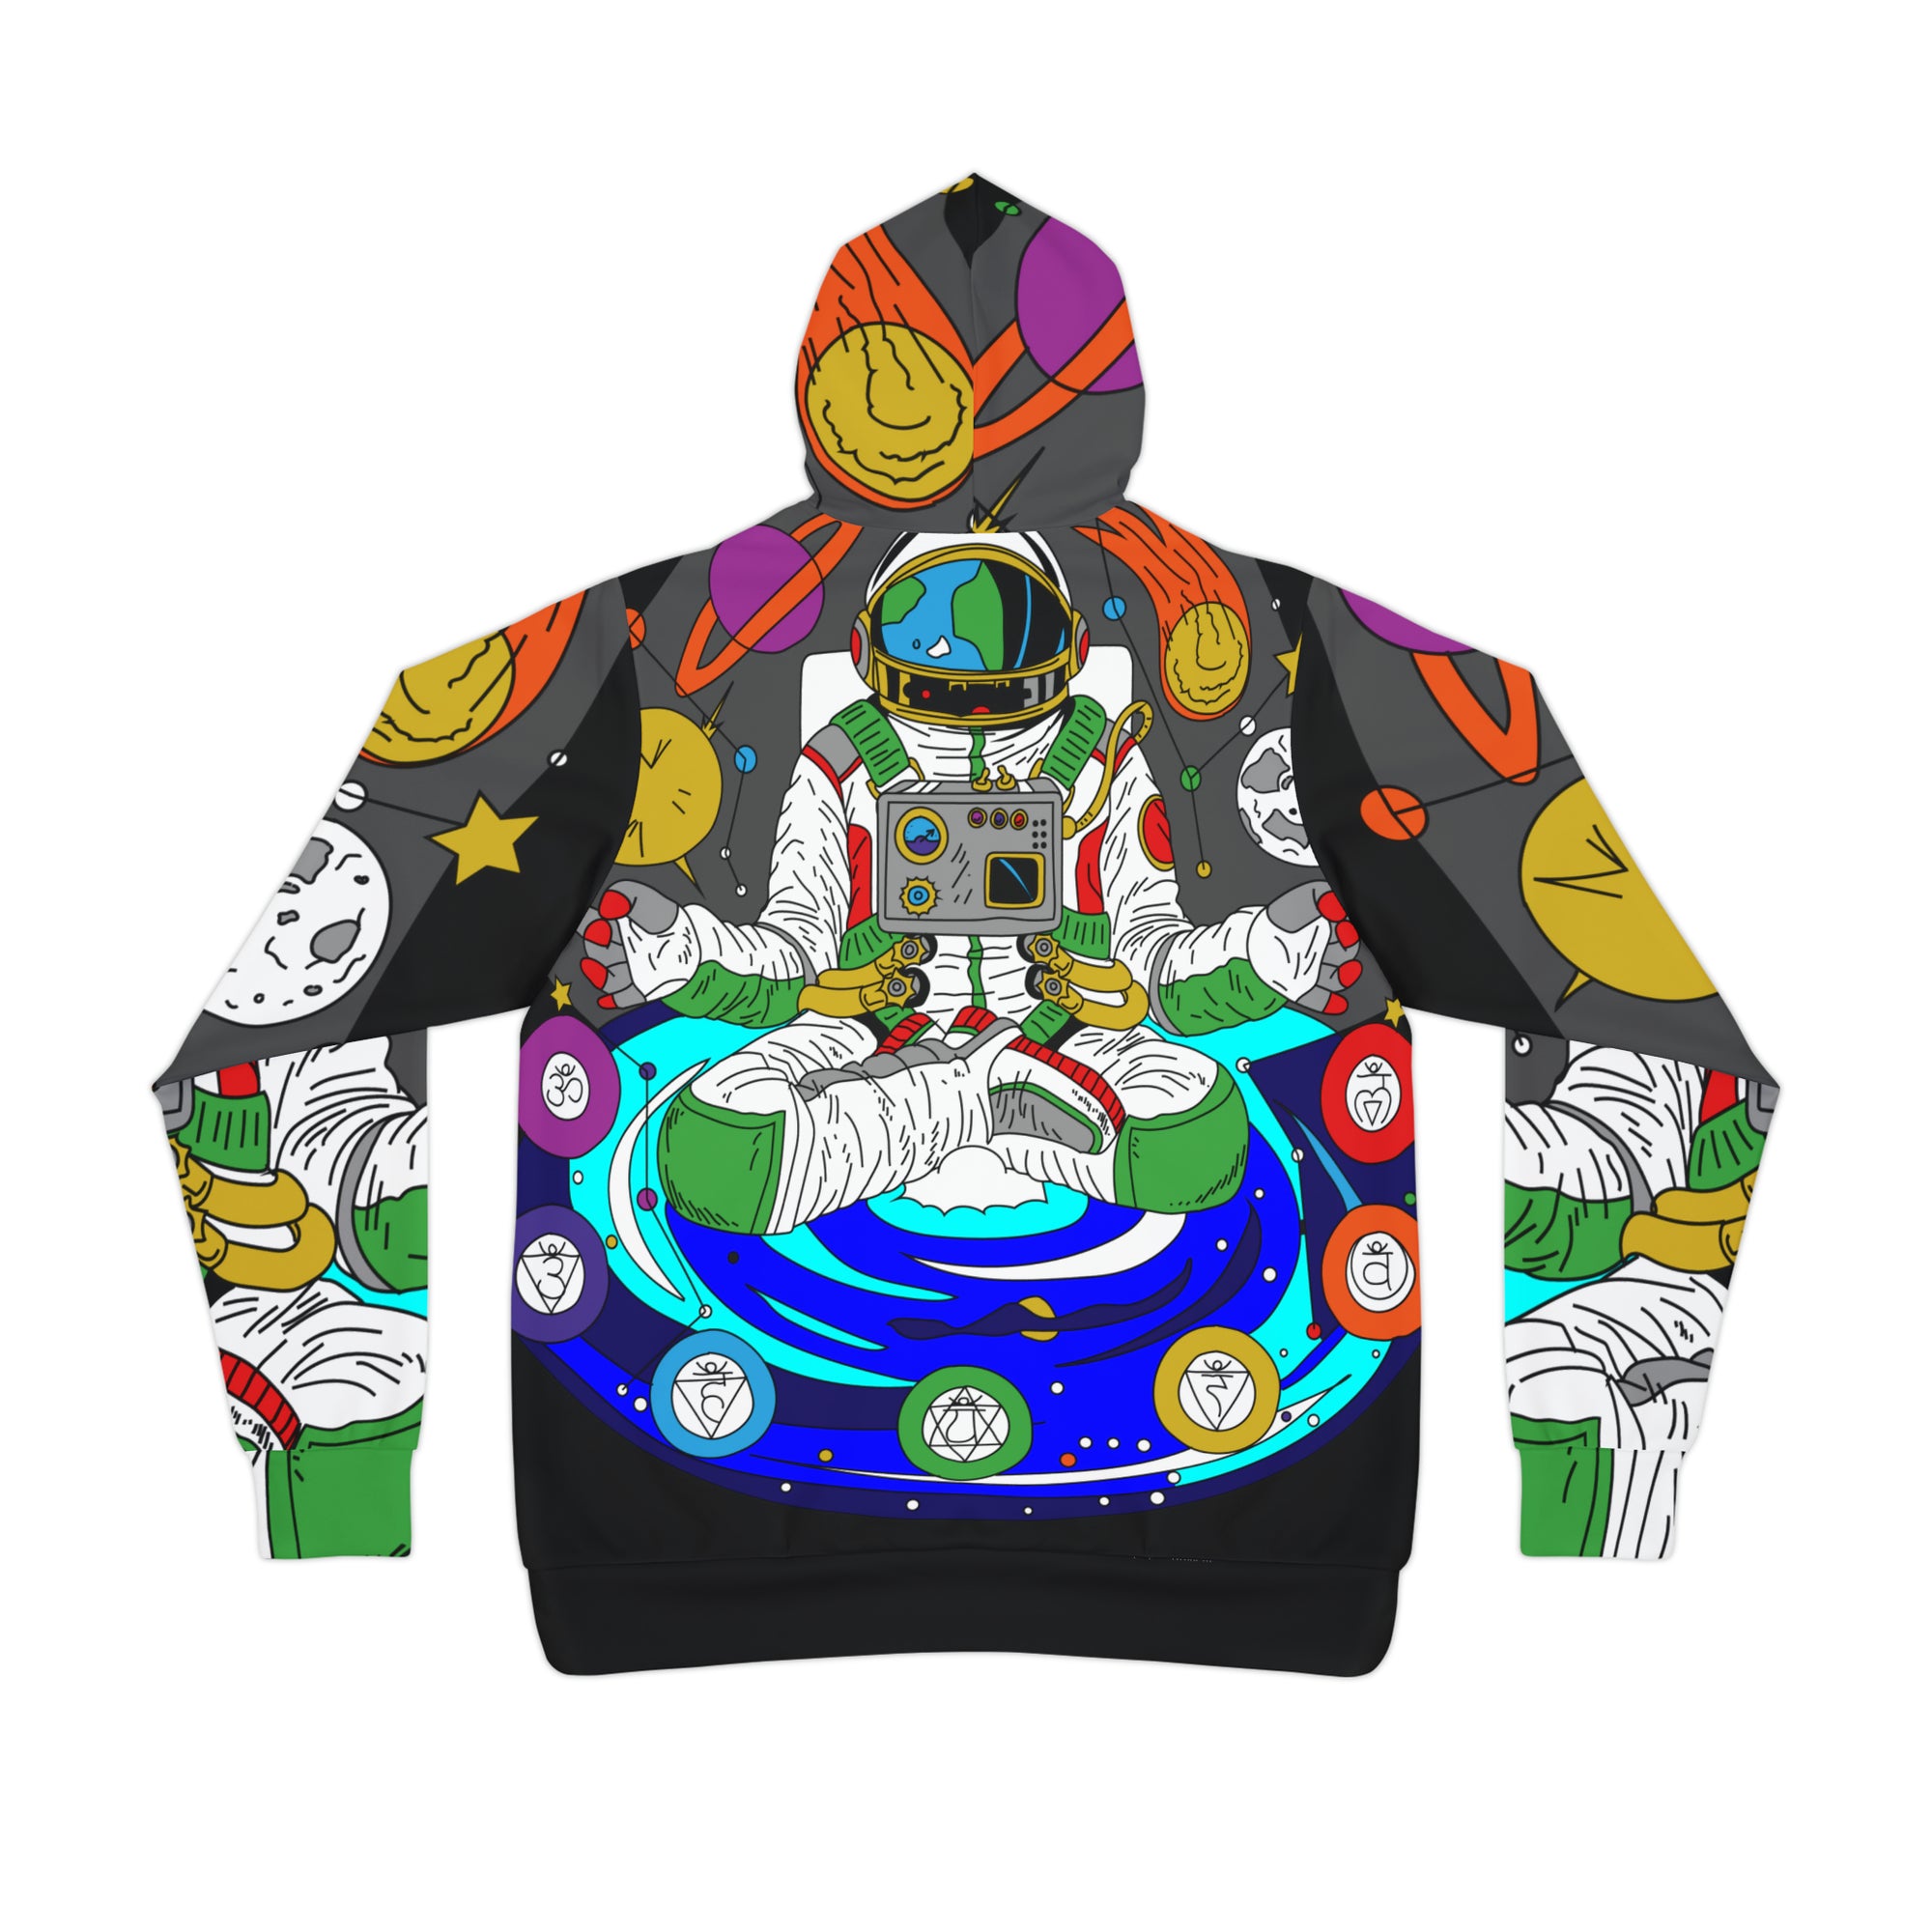 Chakranaut Space Meditation Chakra Planet Unisex Hooded Sweatshirt Athletic Hoodie 95% Recycled Material Sweater By Mike Snowadzky X Mythical Merch